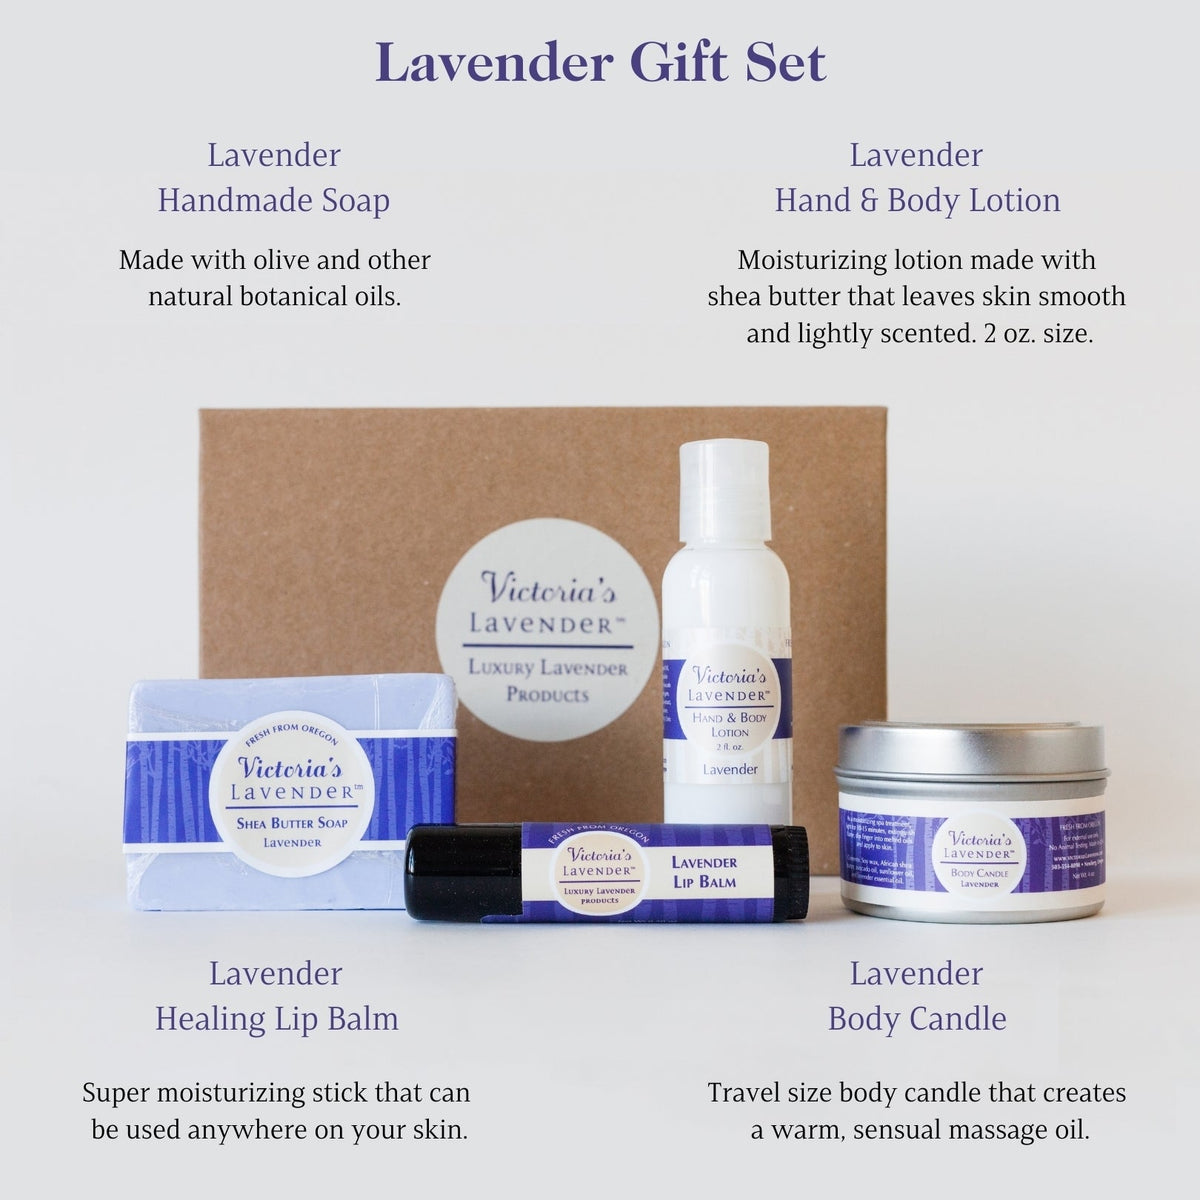 Image displays a set of Victoria's Lavender - Lavender Moisturizing Body Care Gift Set including handmade soap, hand lotion, lip balm, and a massage candle, all branded "Victoria's Lavender". The items are arranged neatly.